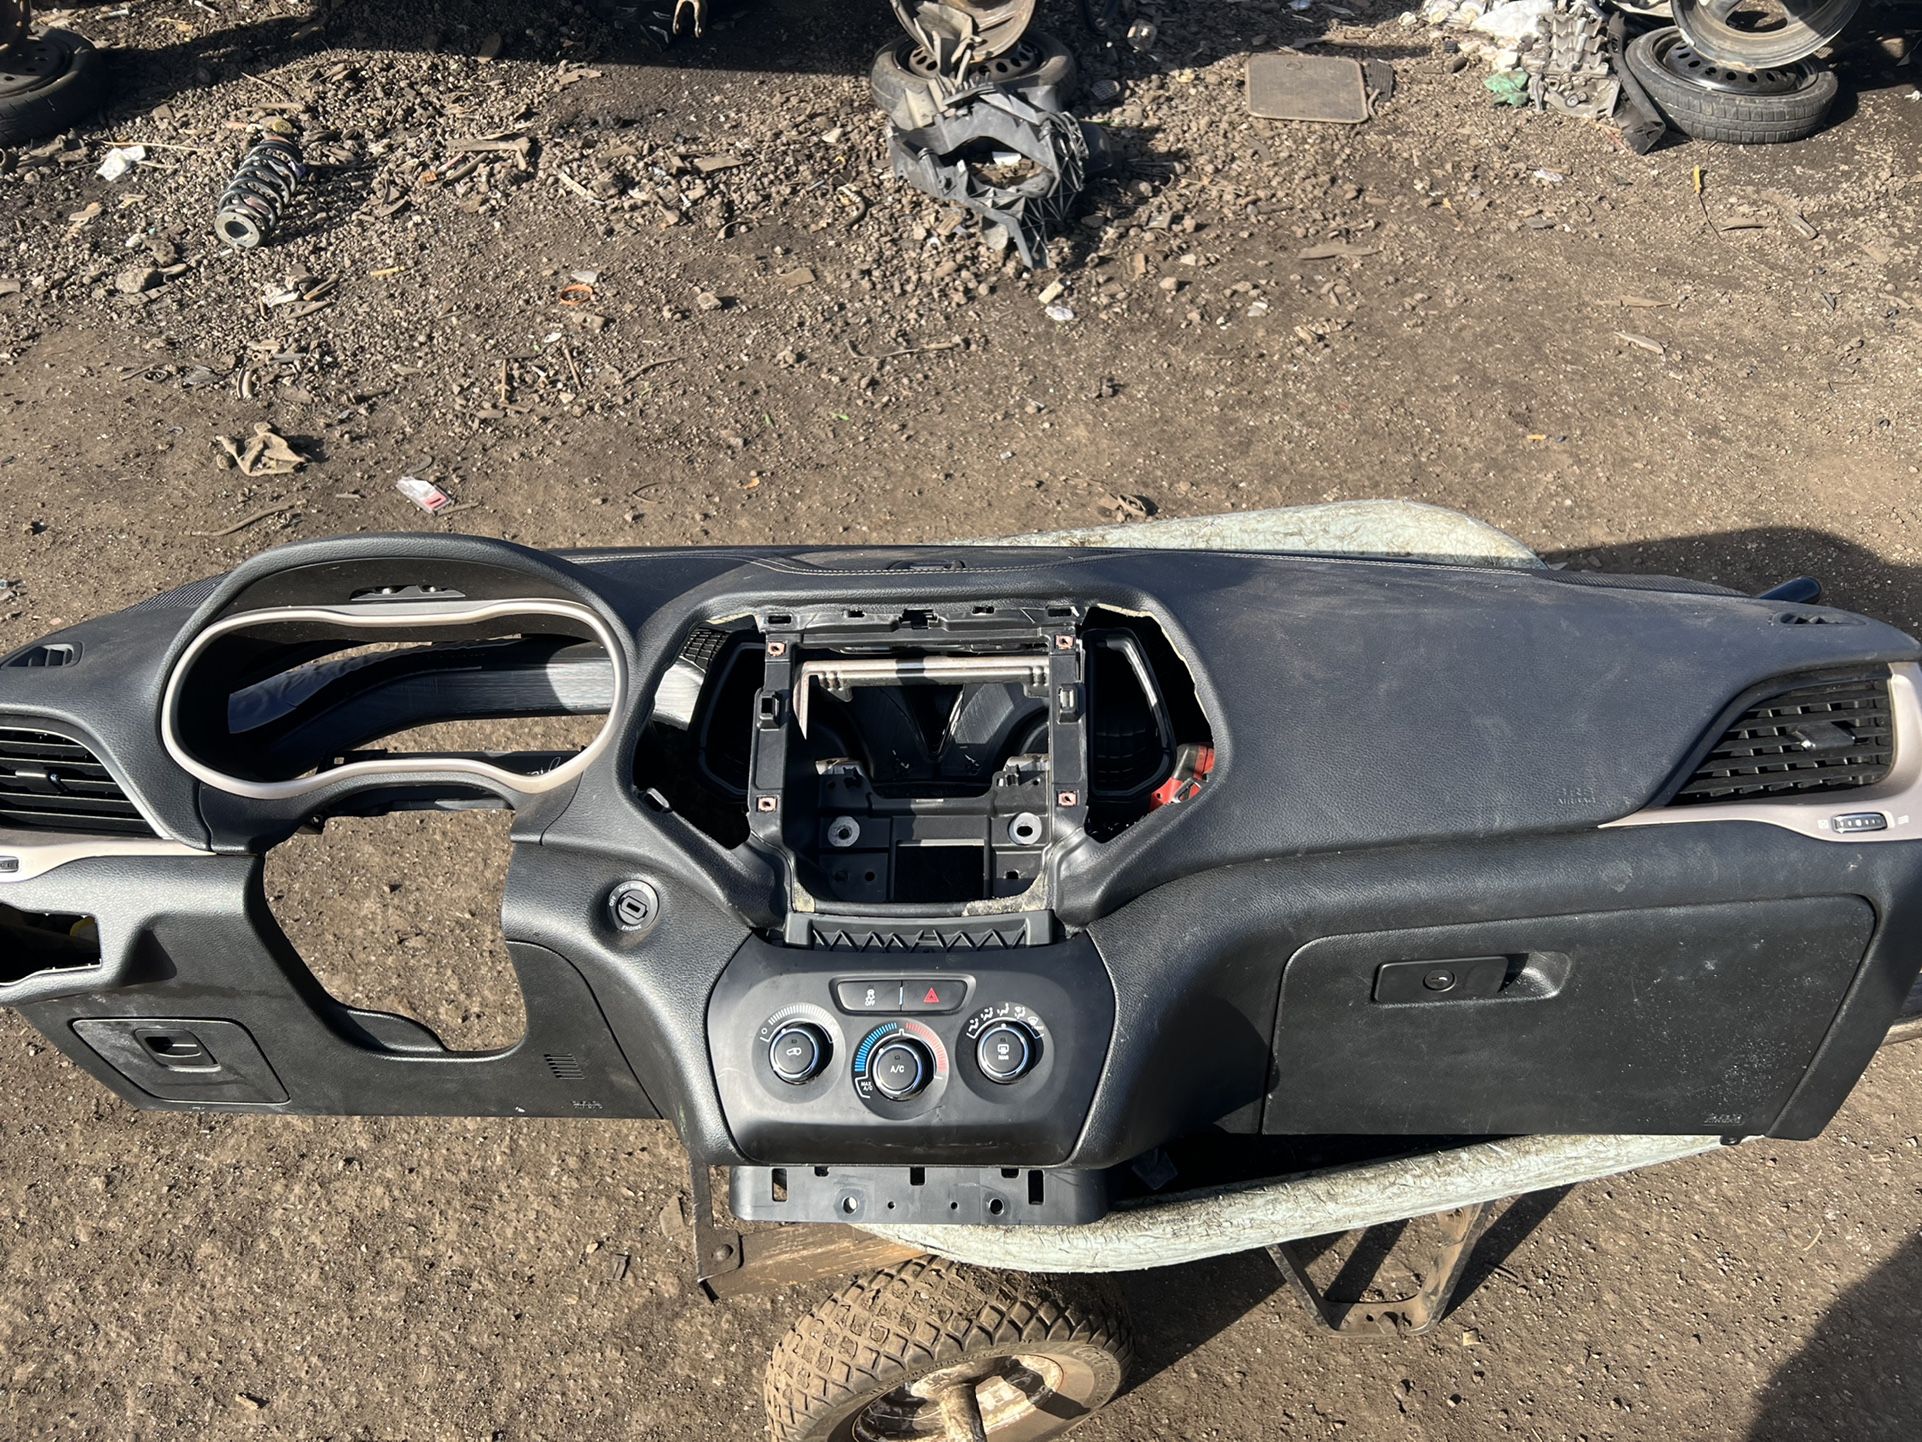 14 To 17 Jeep Cherokee Parts (Dashboard Complete)